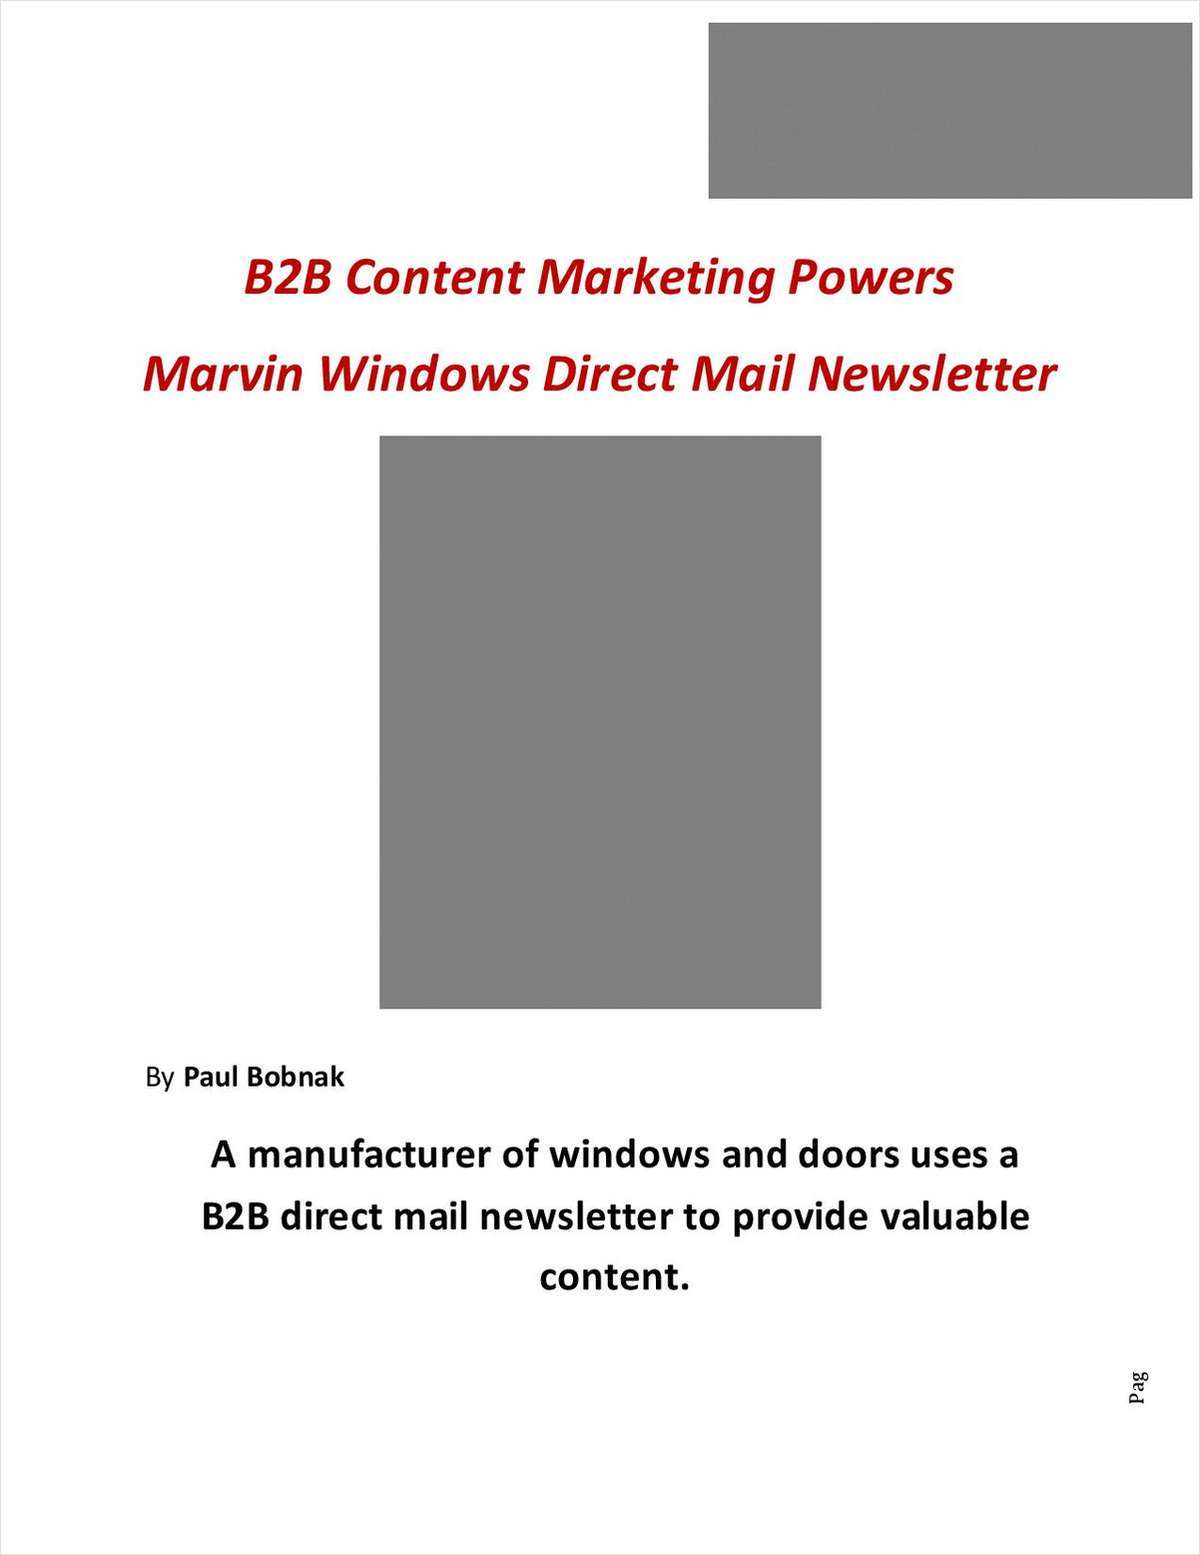 Marvin Windows Provides Content to Professionals With Direct Mail